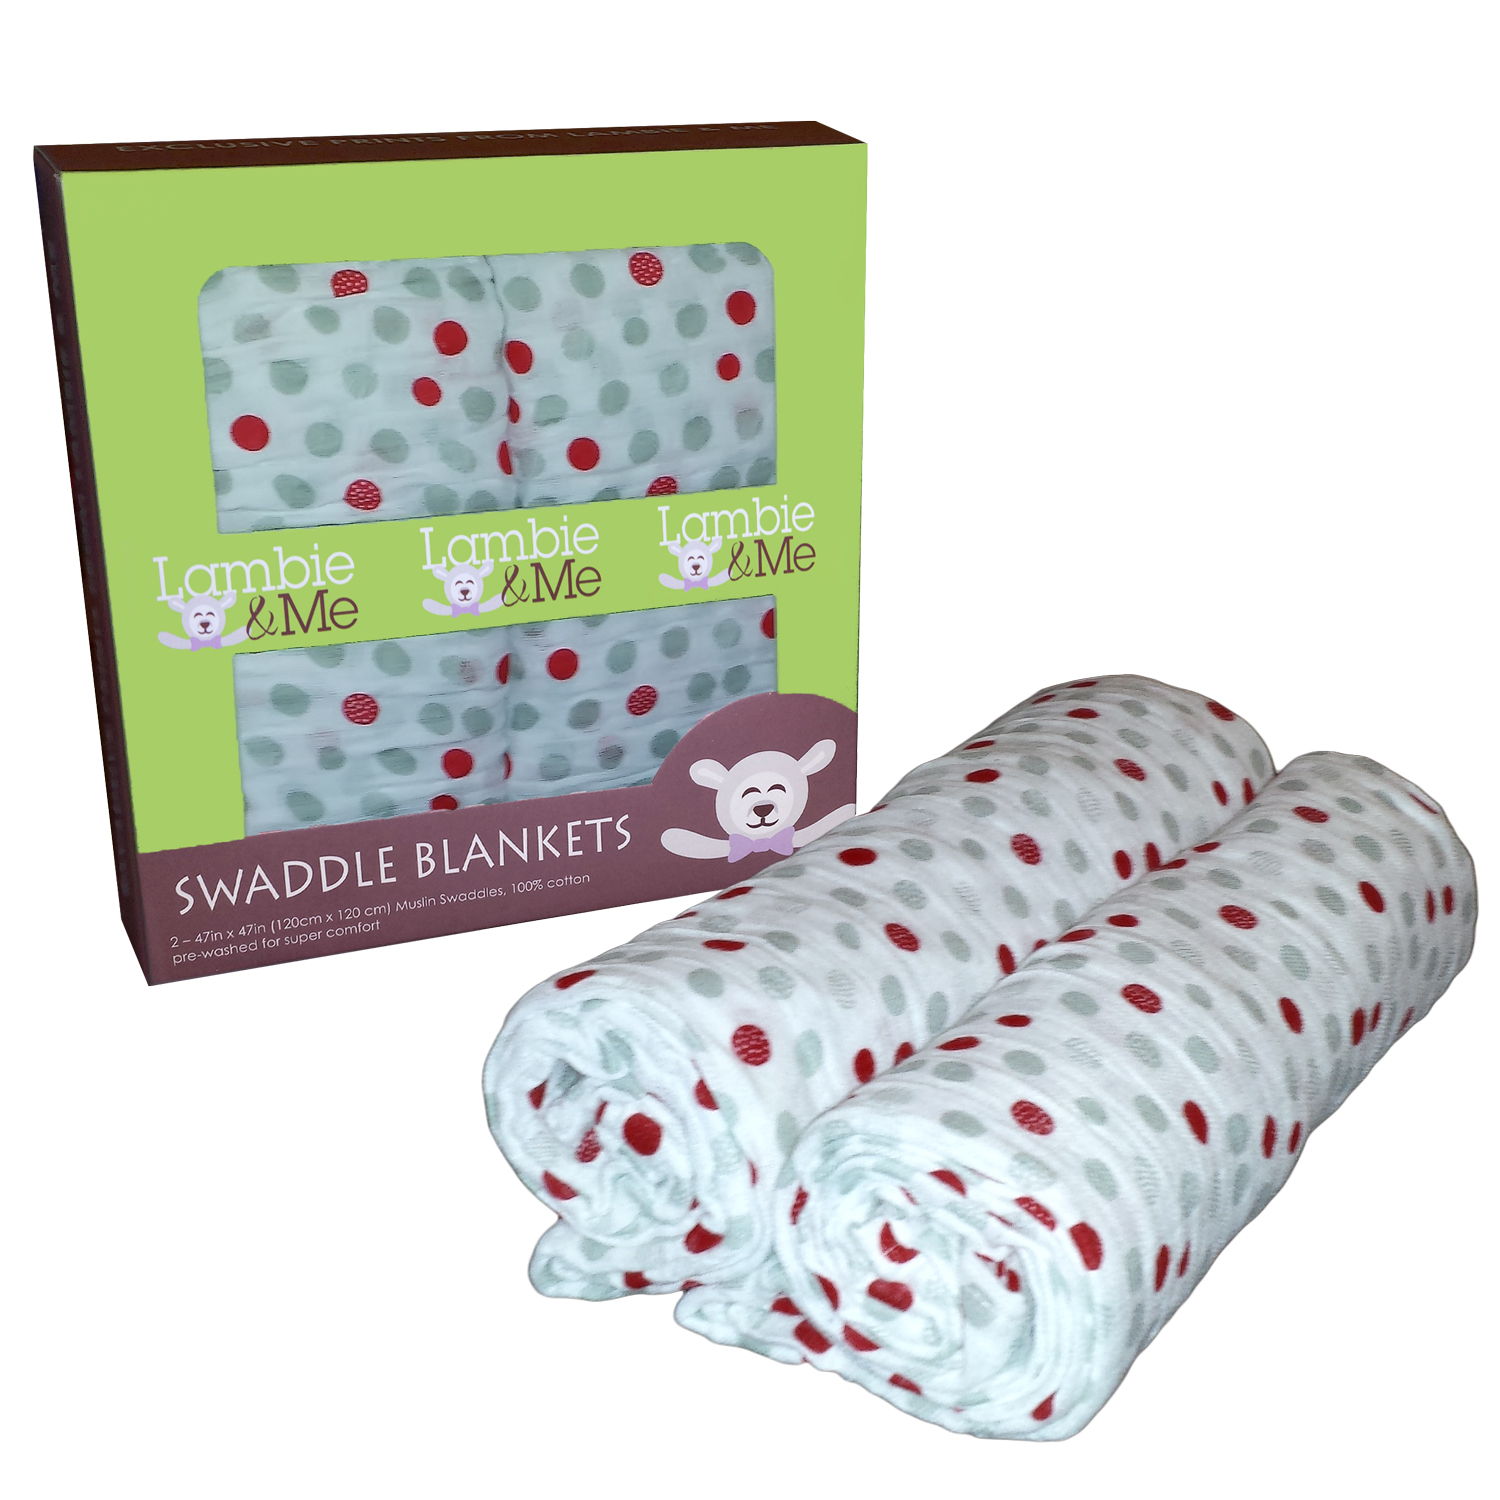 Lambie and Me Swaddle Blankets Giveaway